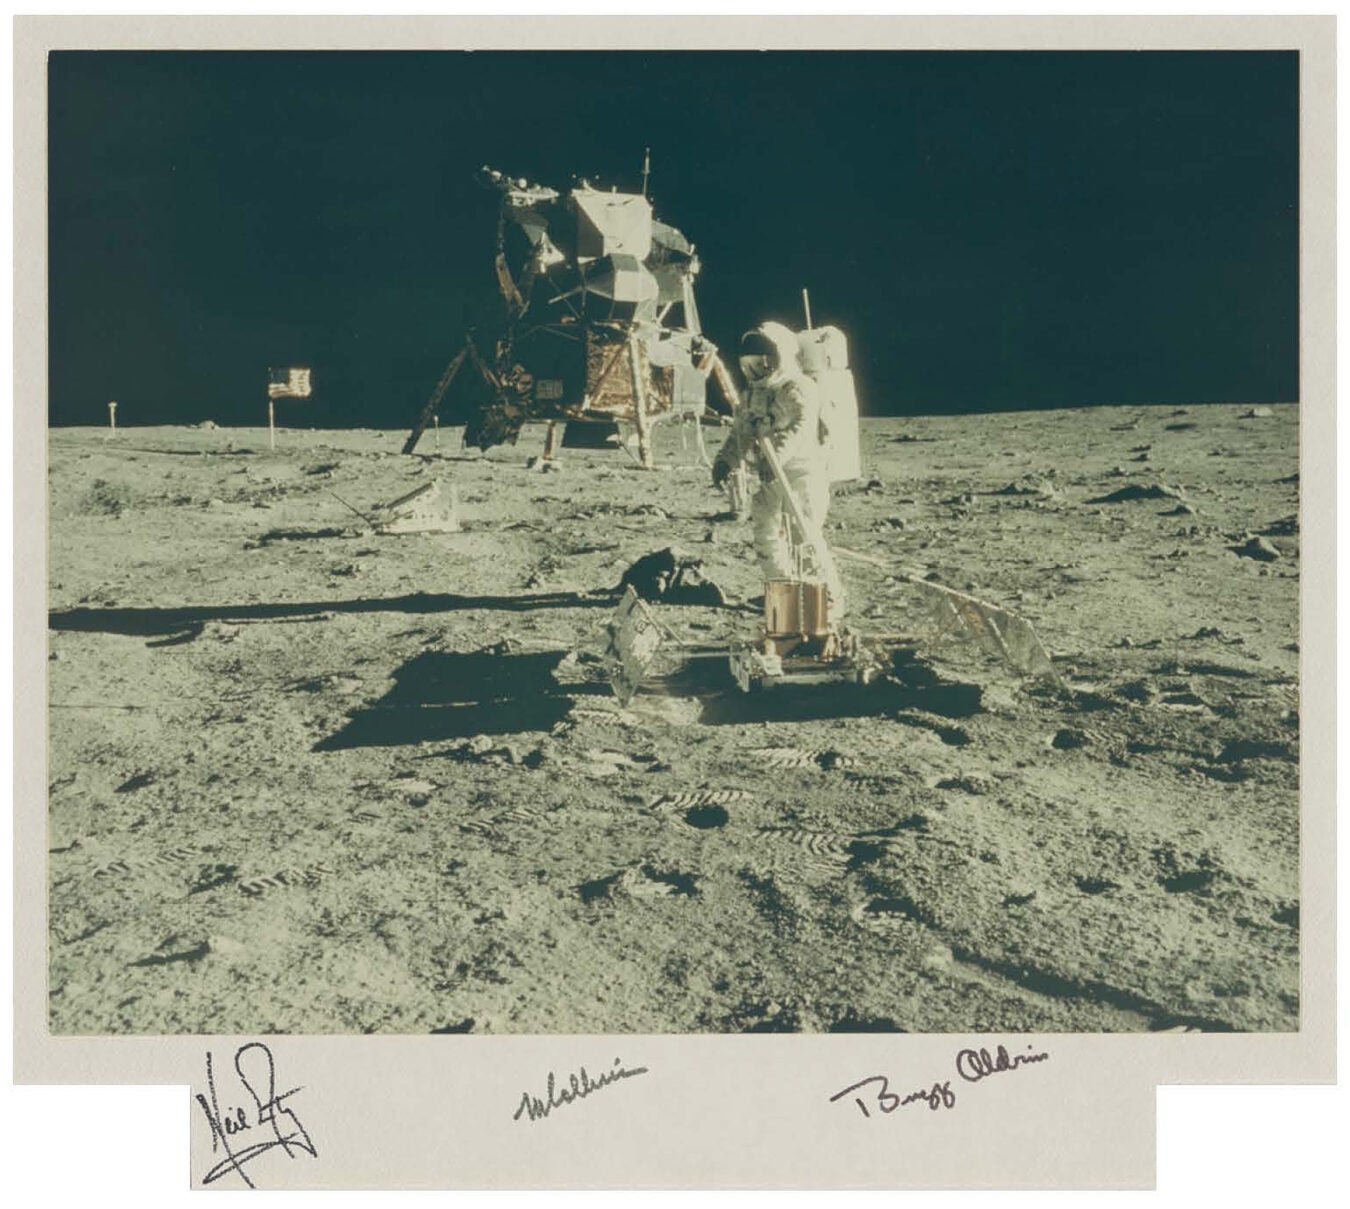 Buzz Aldrin deploys a seismometer to detect moonquakes and meteoroid impacts.